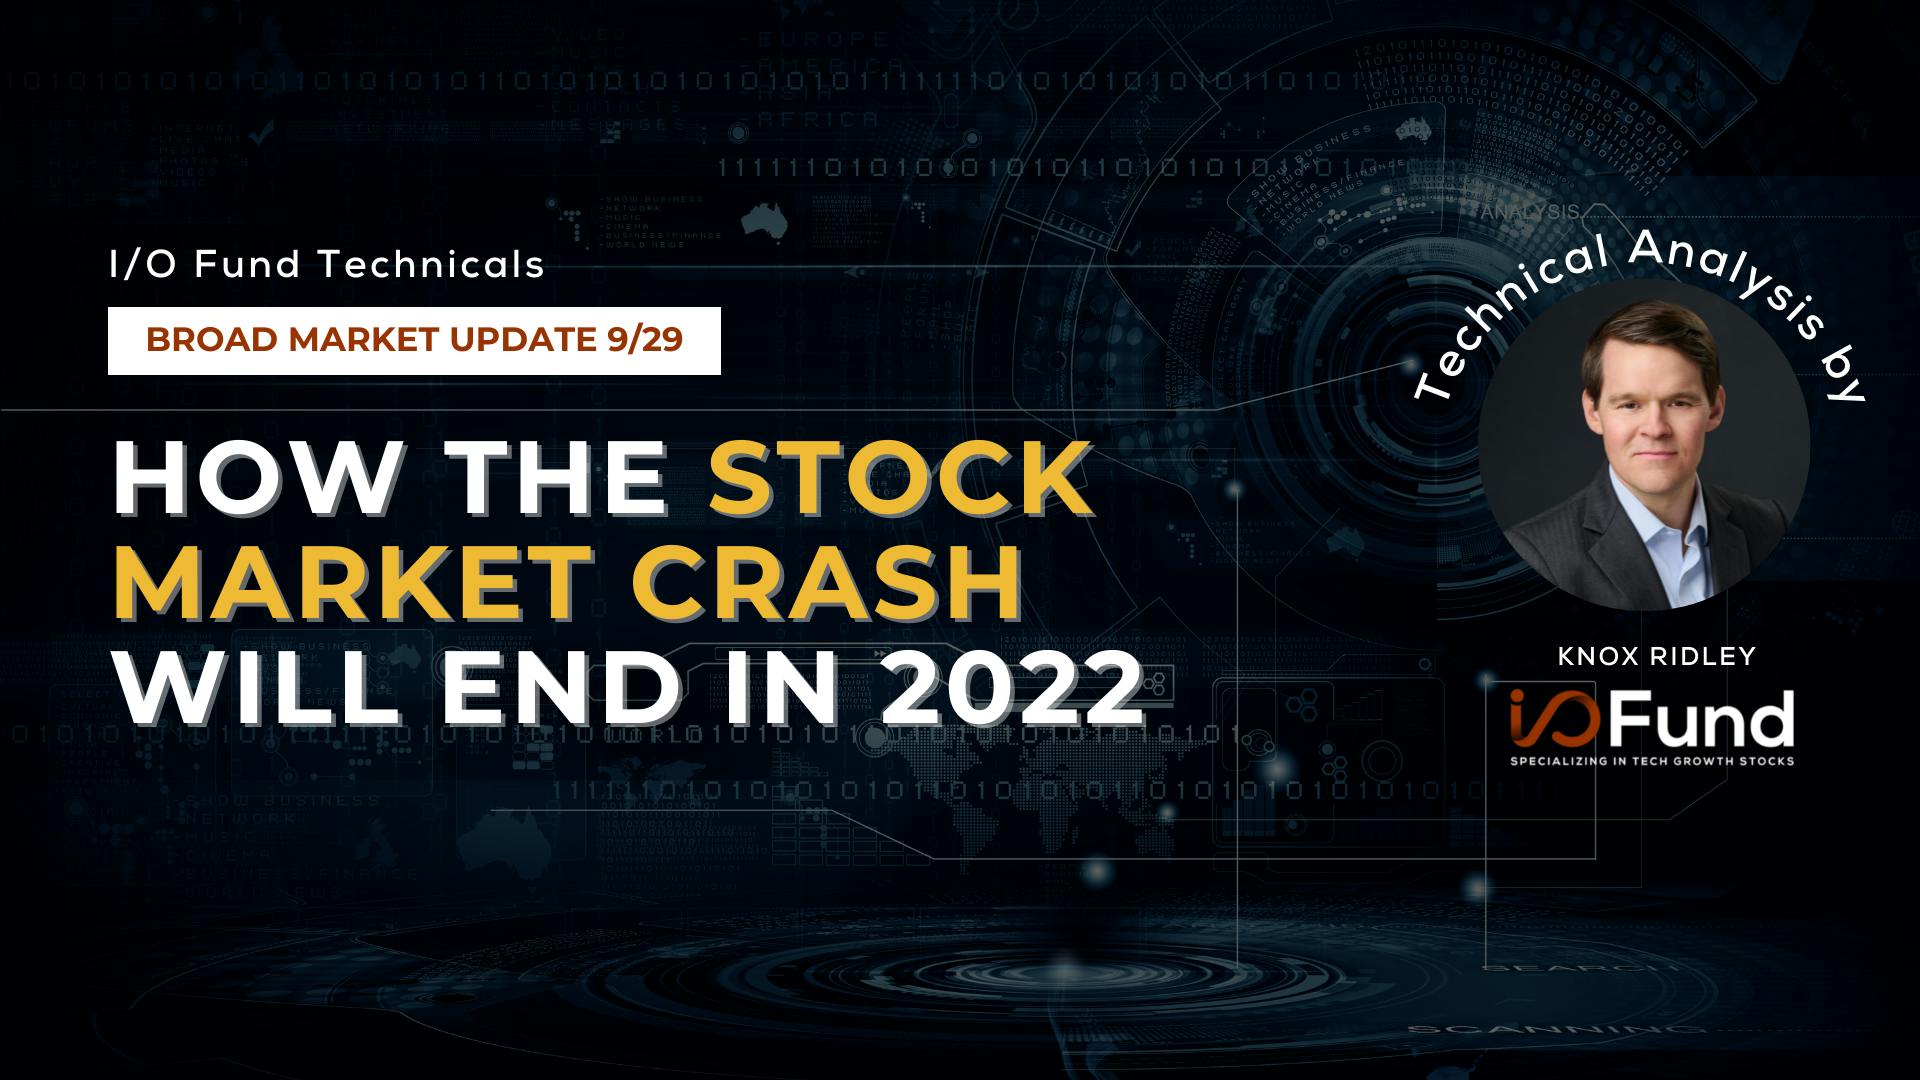 How the Stock Market Crash Will End in 2022